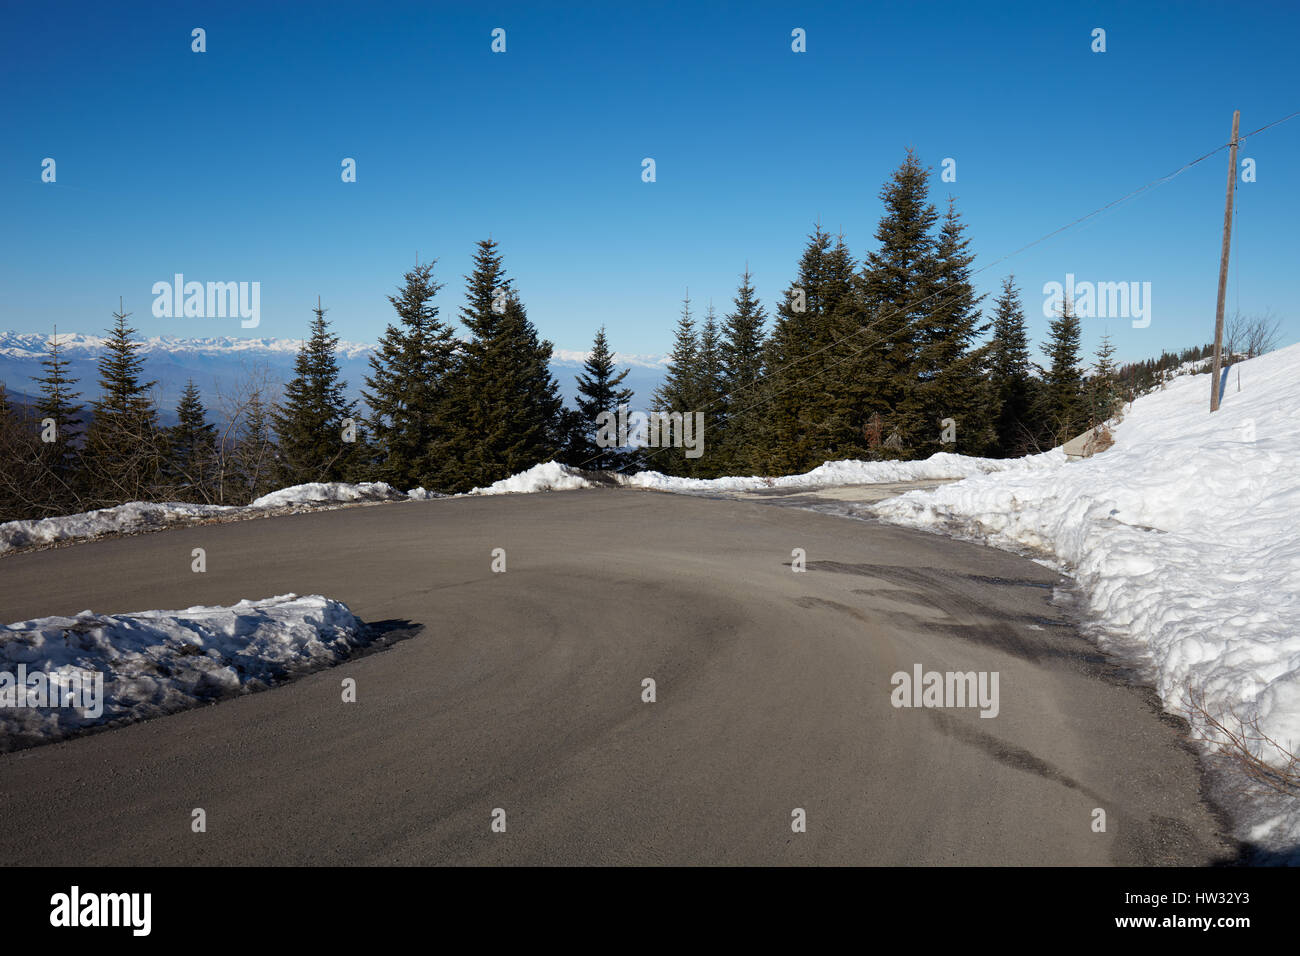 Empty mountain road curve on Alps with pine trees and snow on sides Stock Photo